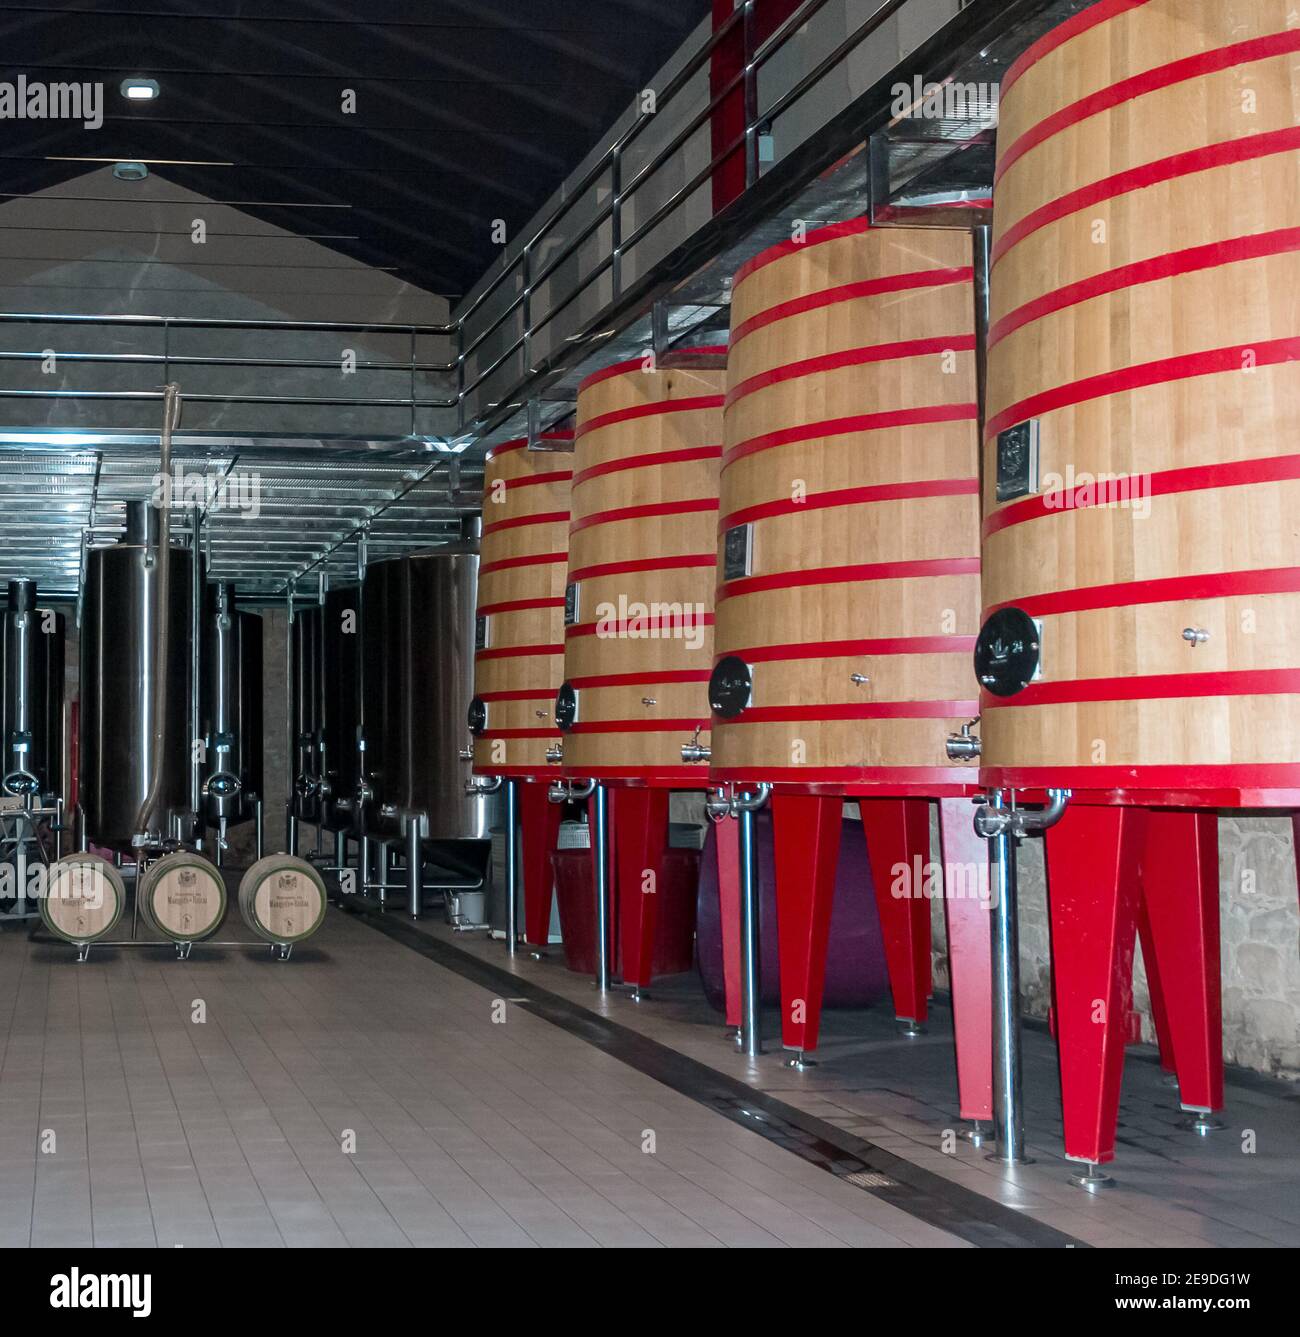 EL CIEGO, ÁLAVA, SPAI, SPAIN - Jan 31, 2021: The picture shows the interior of the Marques de Riscal Winery. Picture taken during a guided tour in 201 Stock Photo